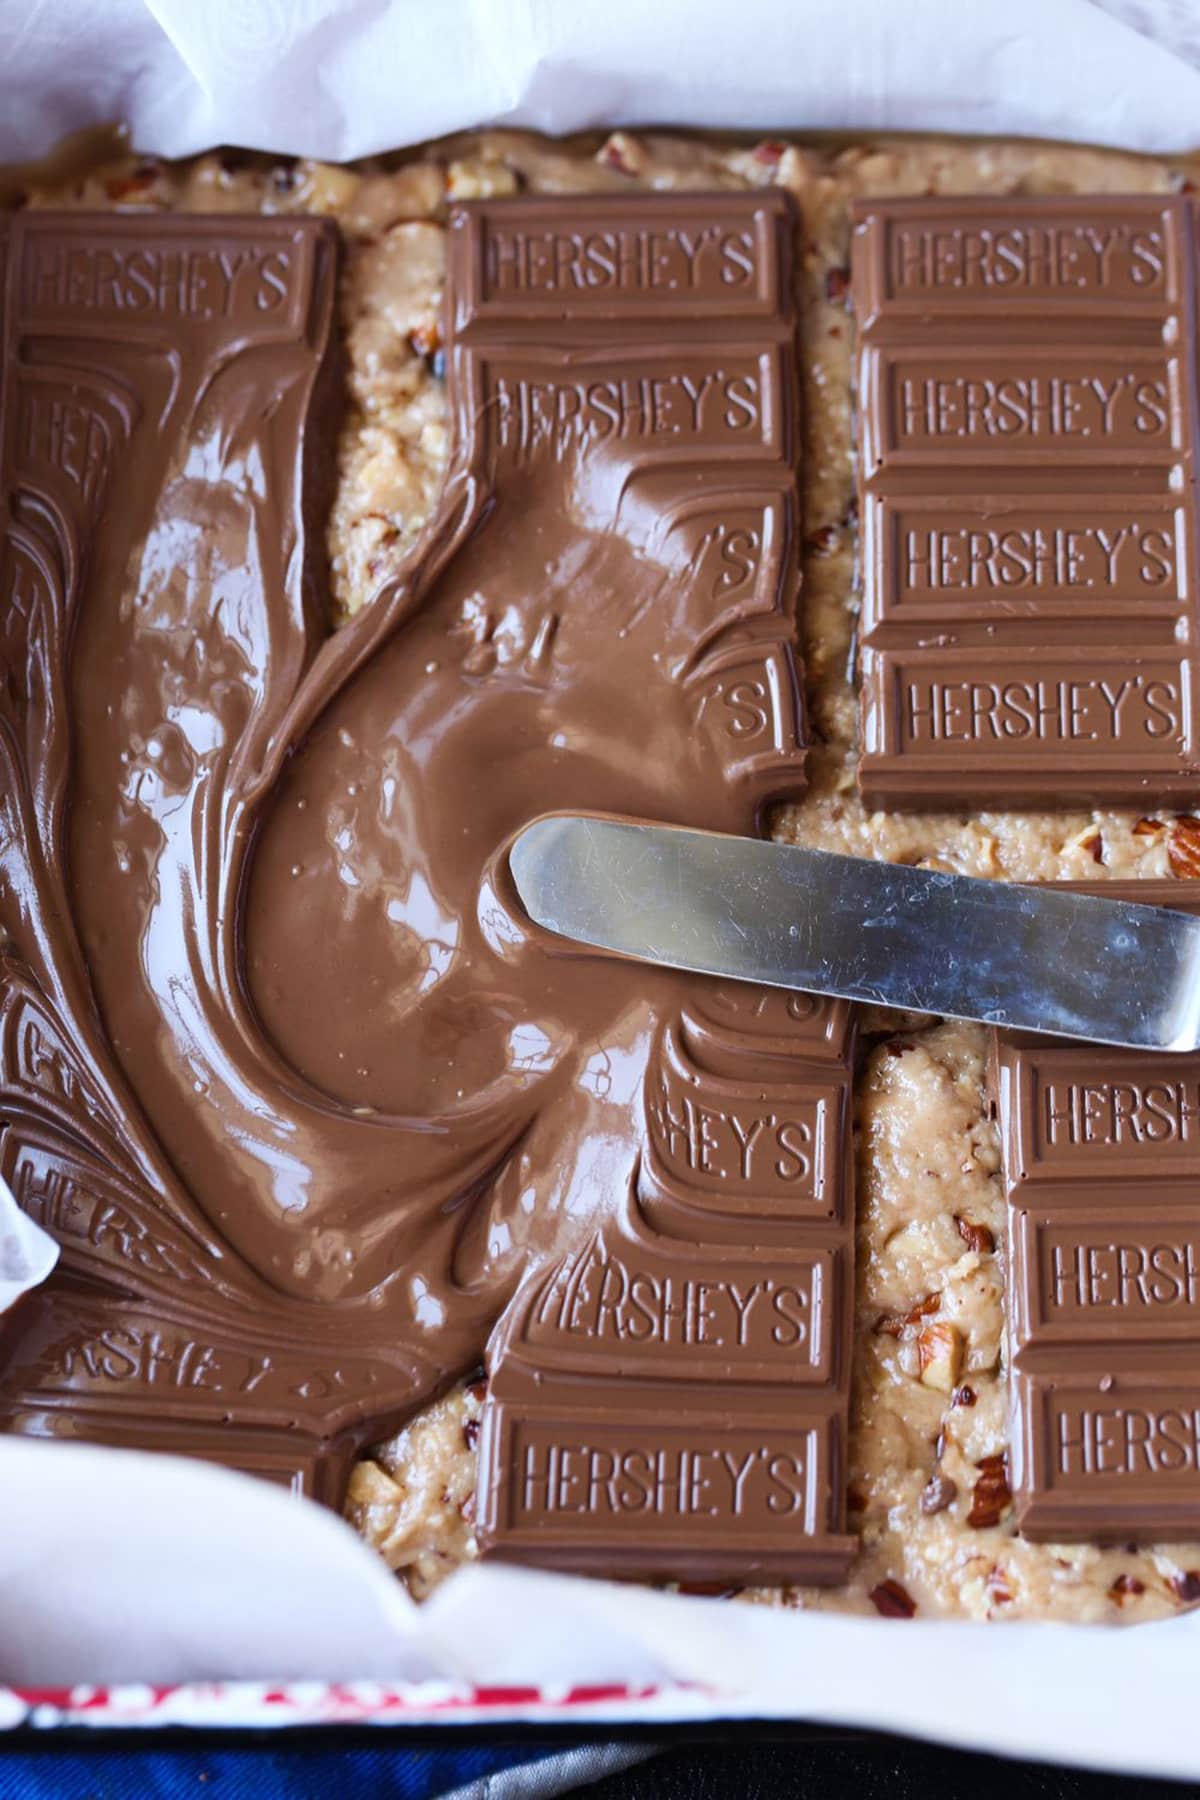 Melted Hershey's being spread on toffee mixture